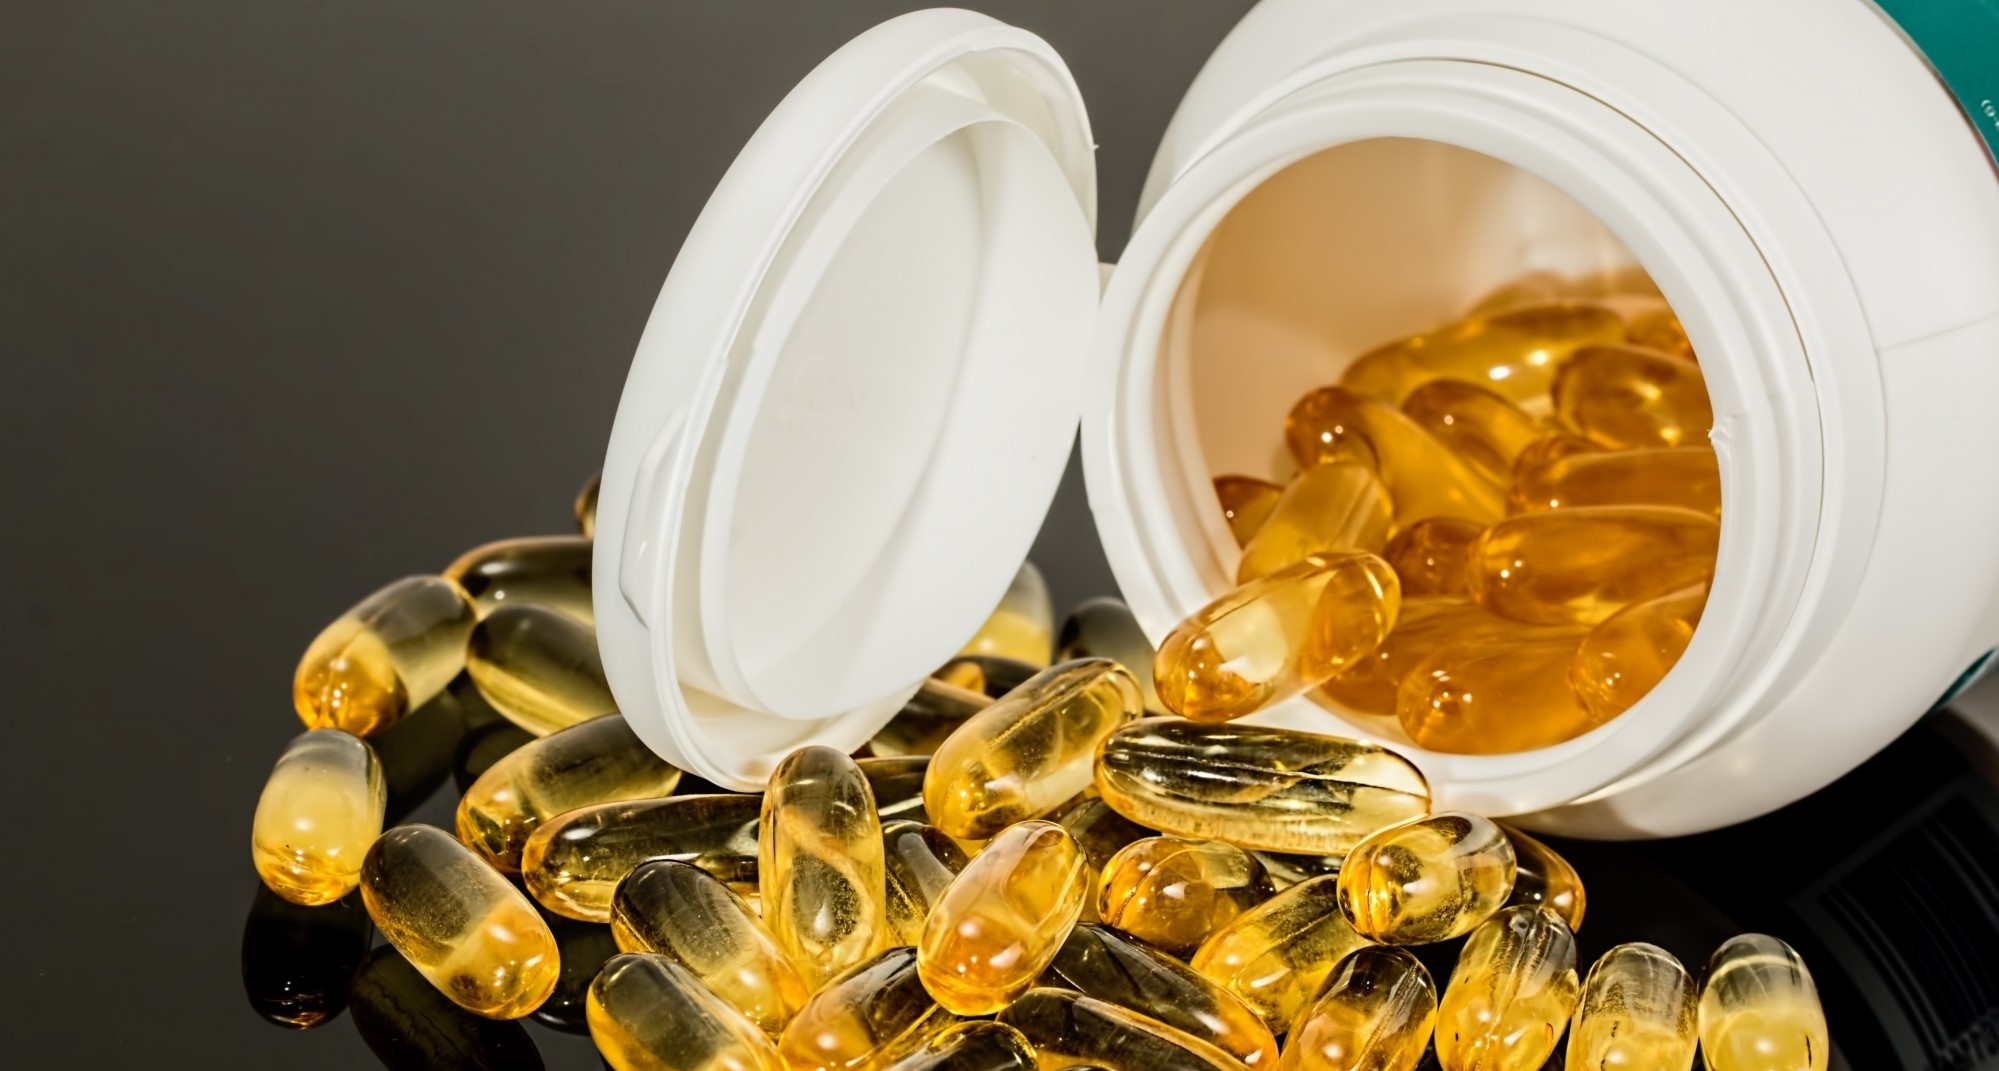 Omega-3 oils boost attention as much as ADHD drugs in some children